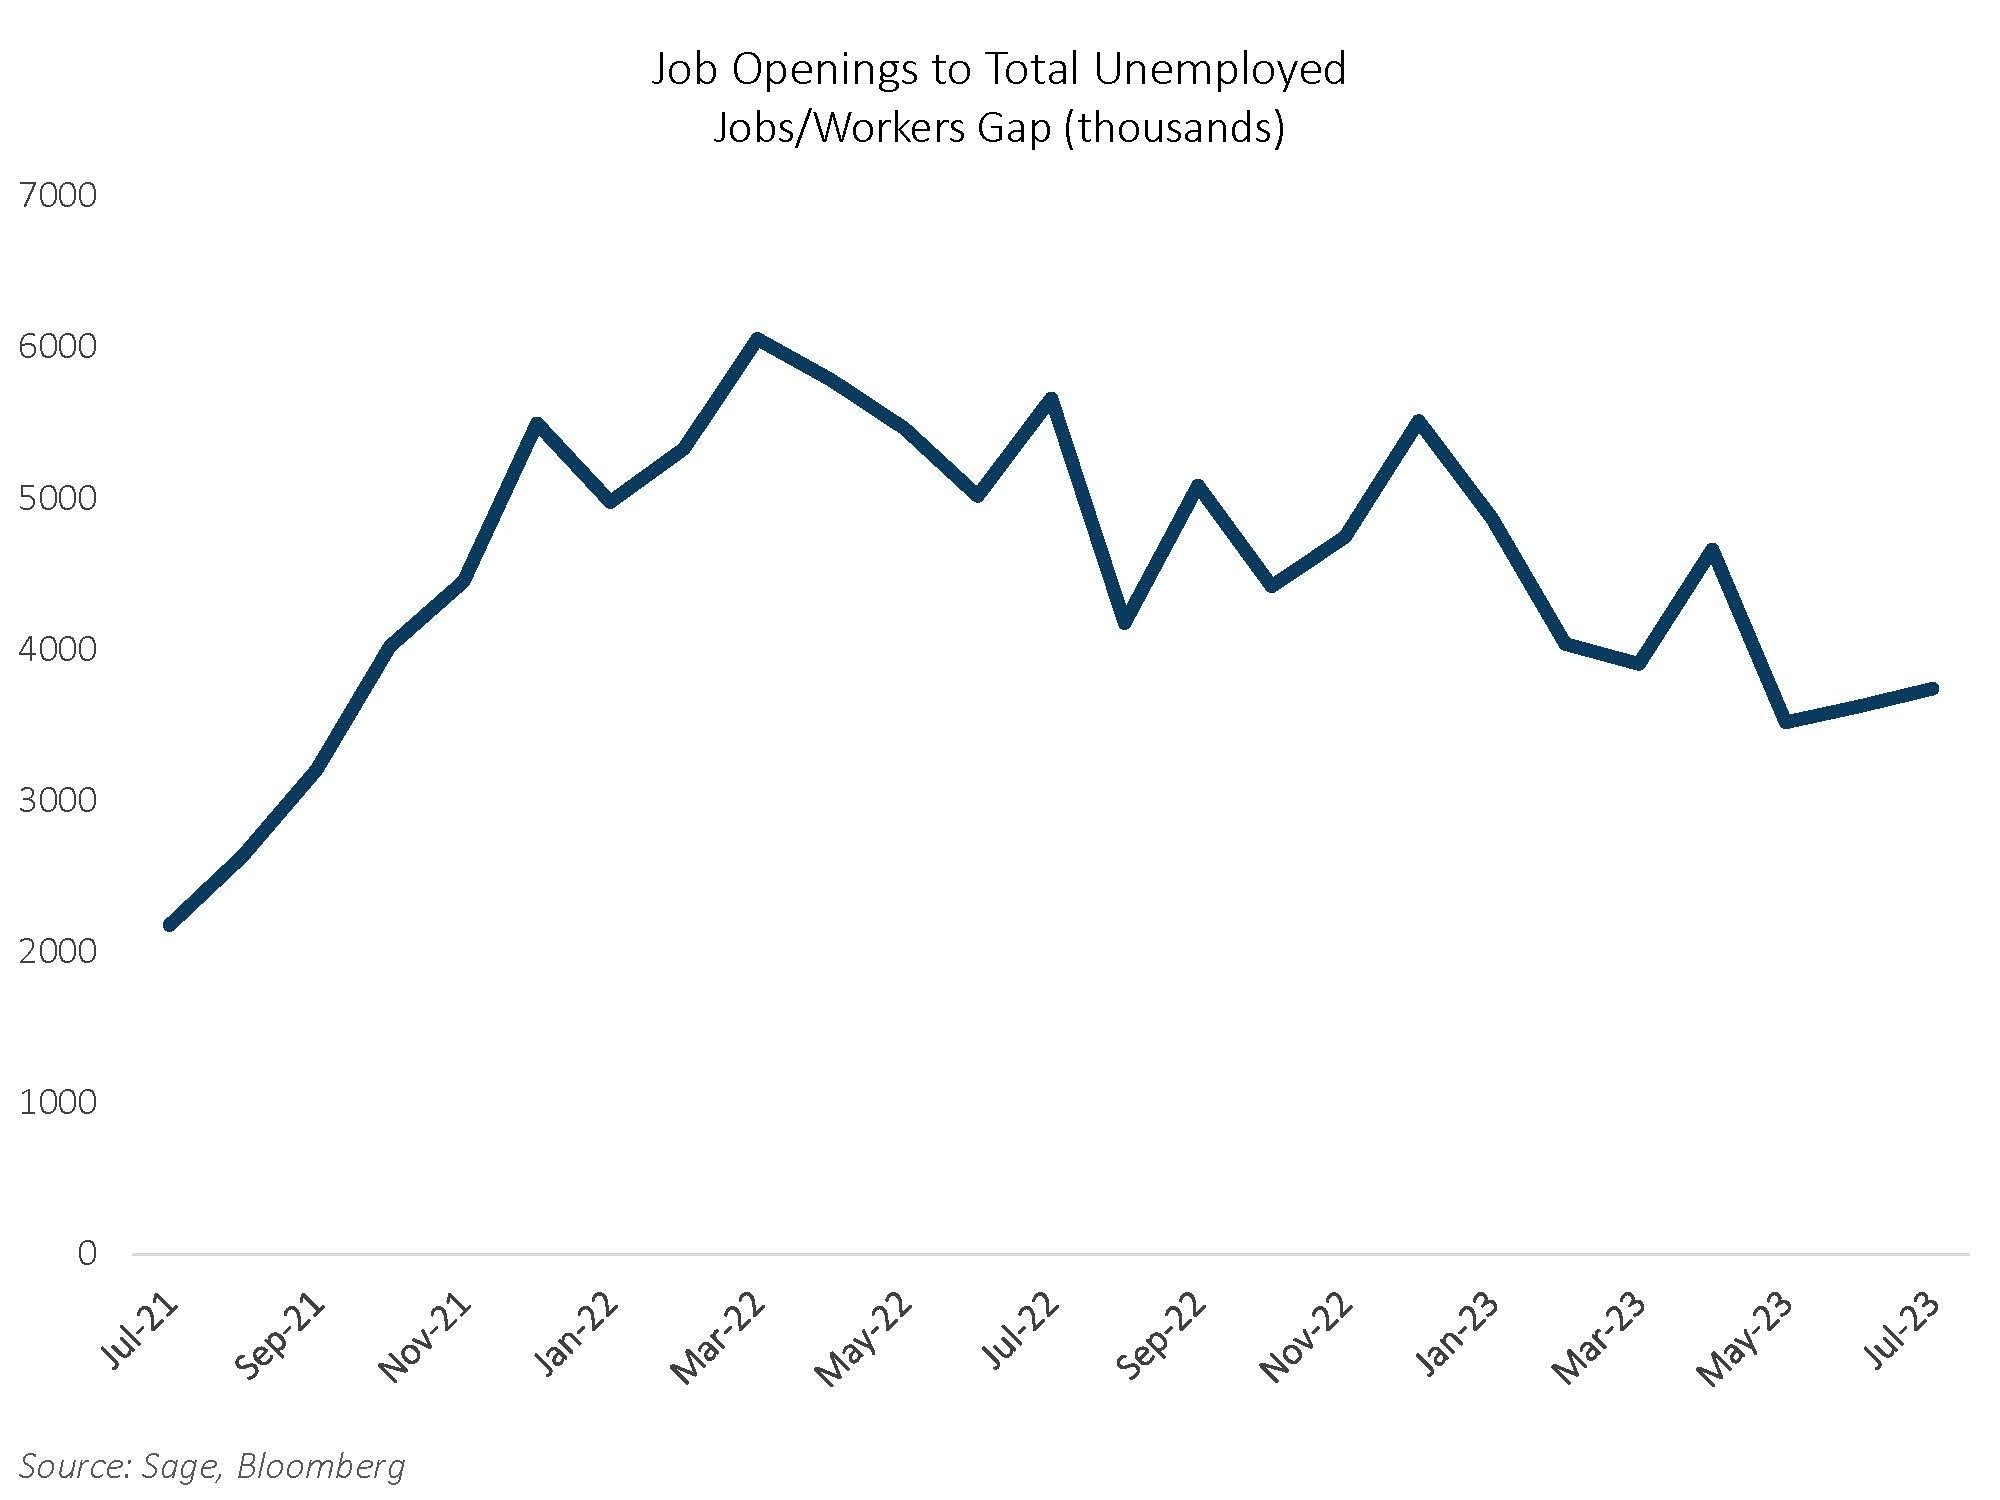 Job openings to total unemployed